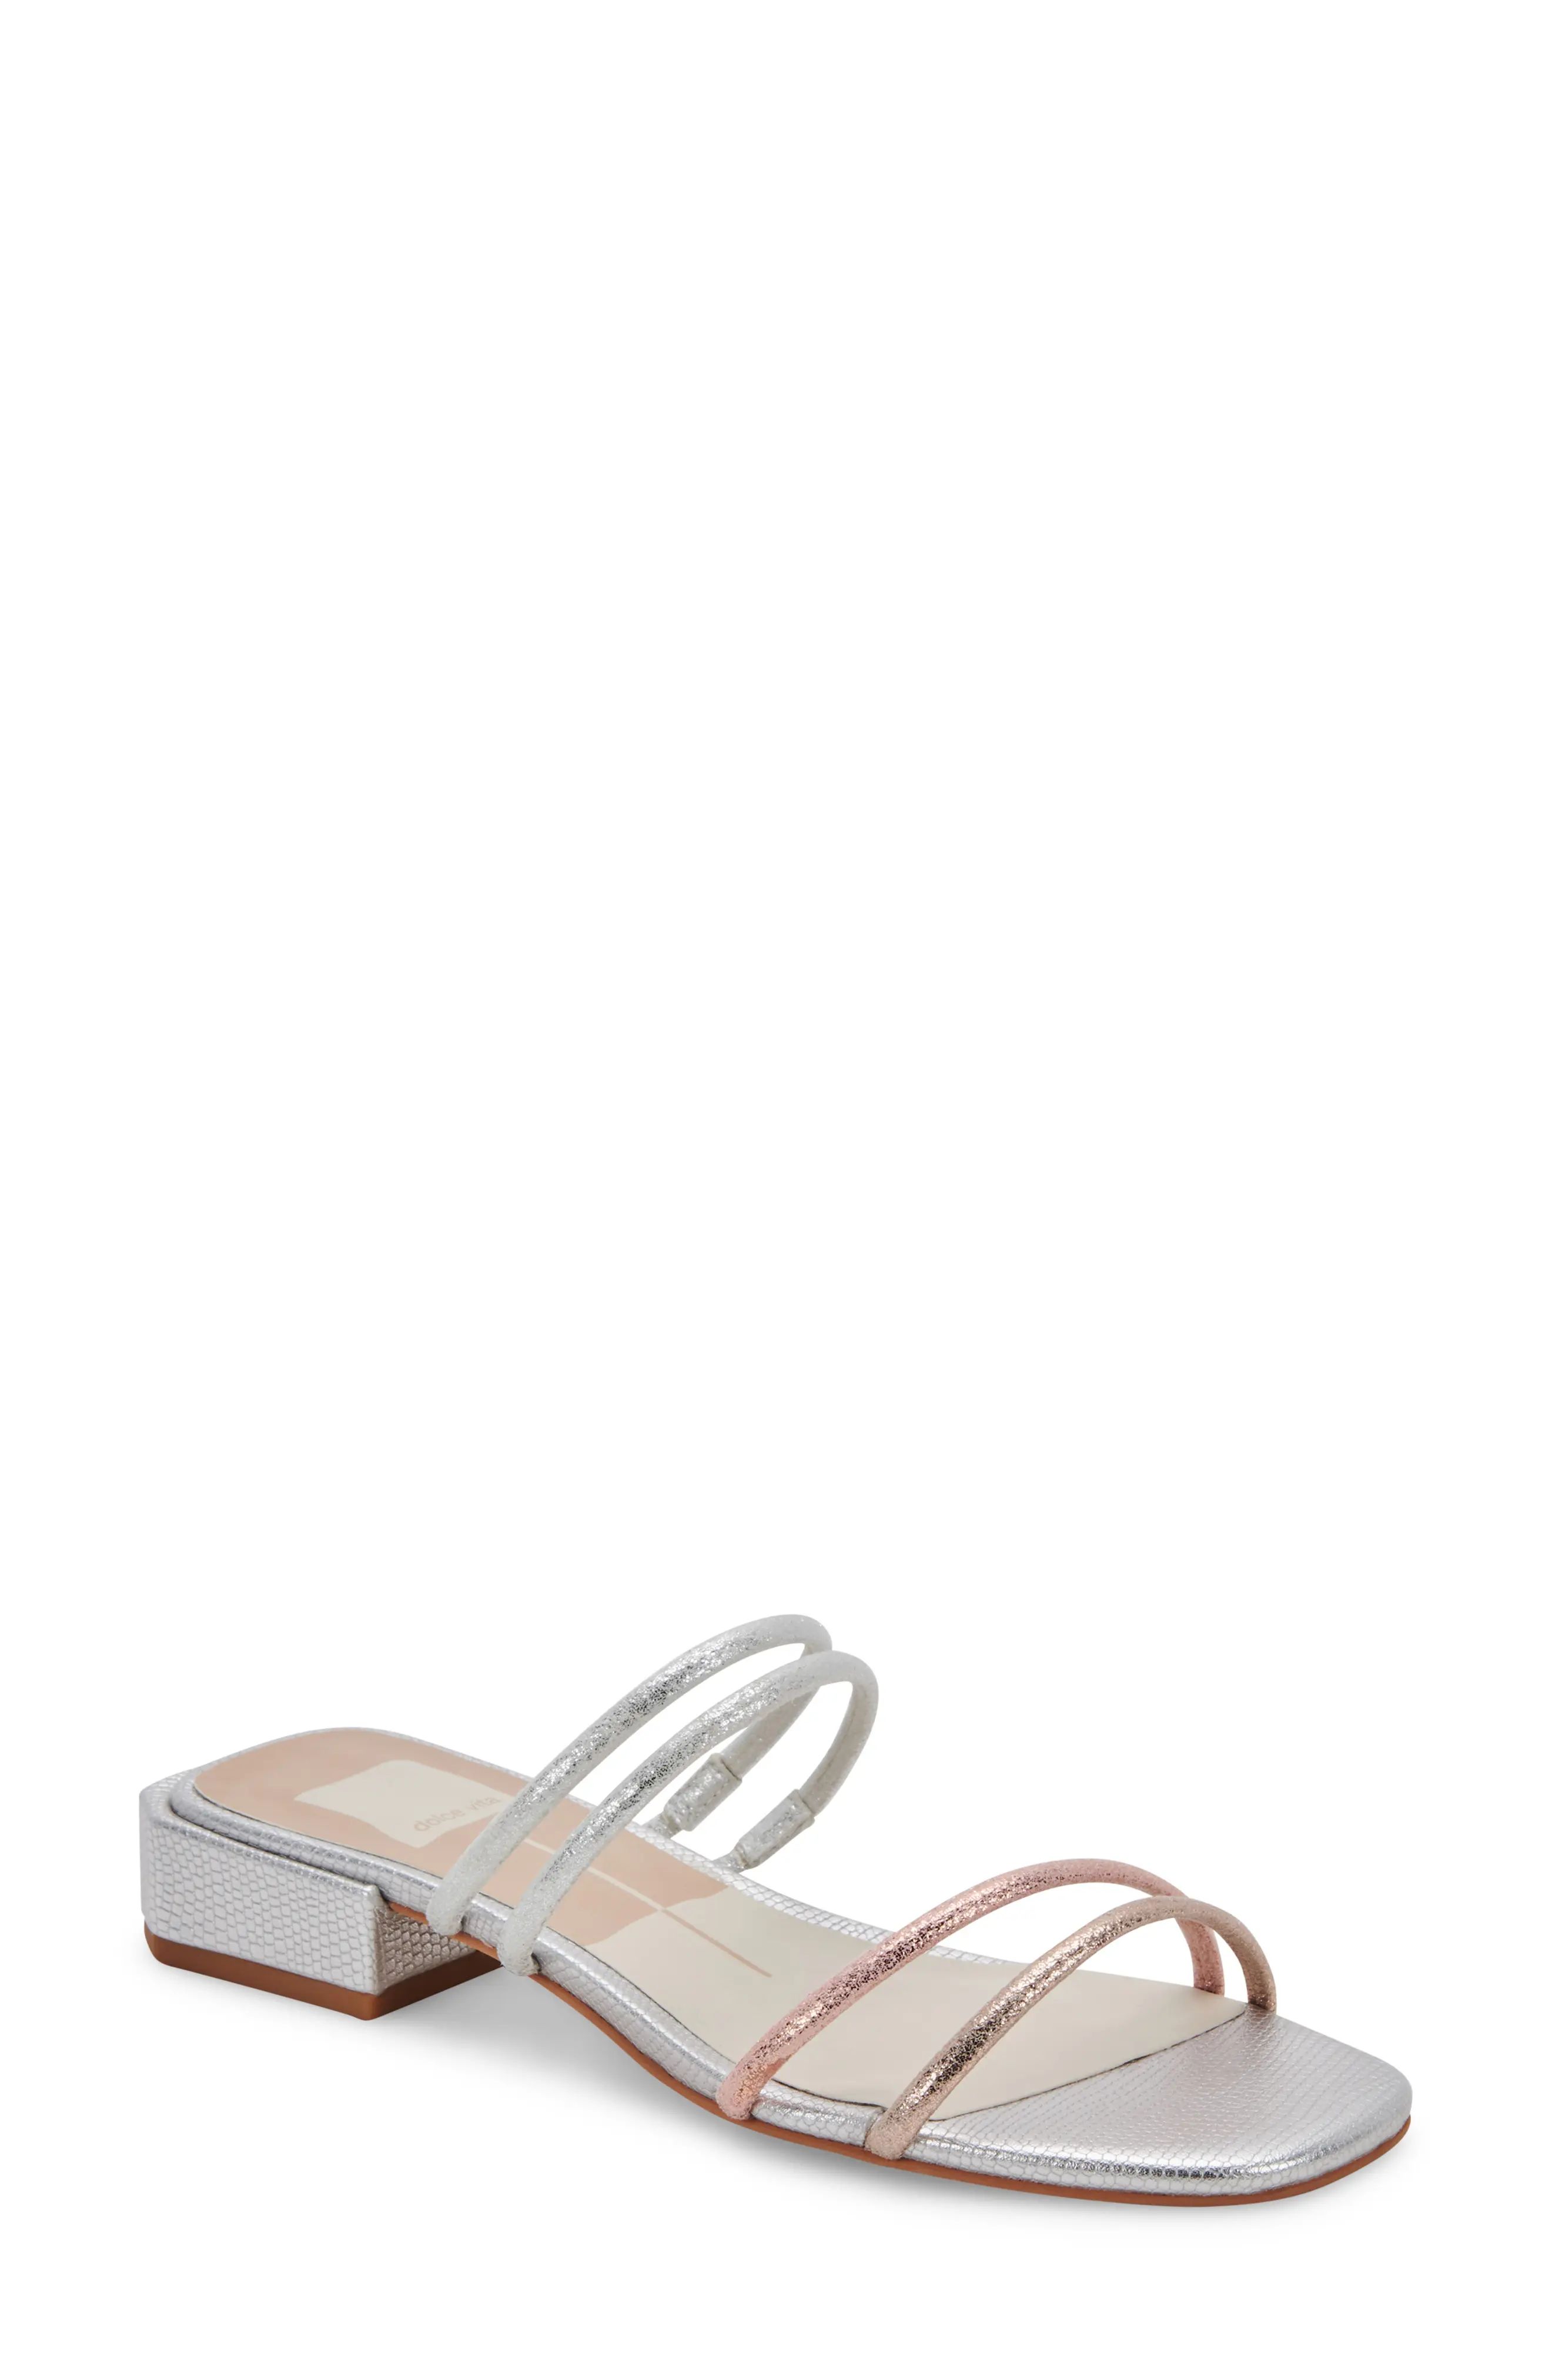 Dolce Vita Haize Strappy Slide Sandal in Silver/Gold Metallic Suede at Nordstrom, Size 7.5 | Nordstrom